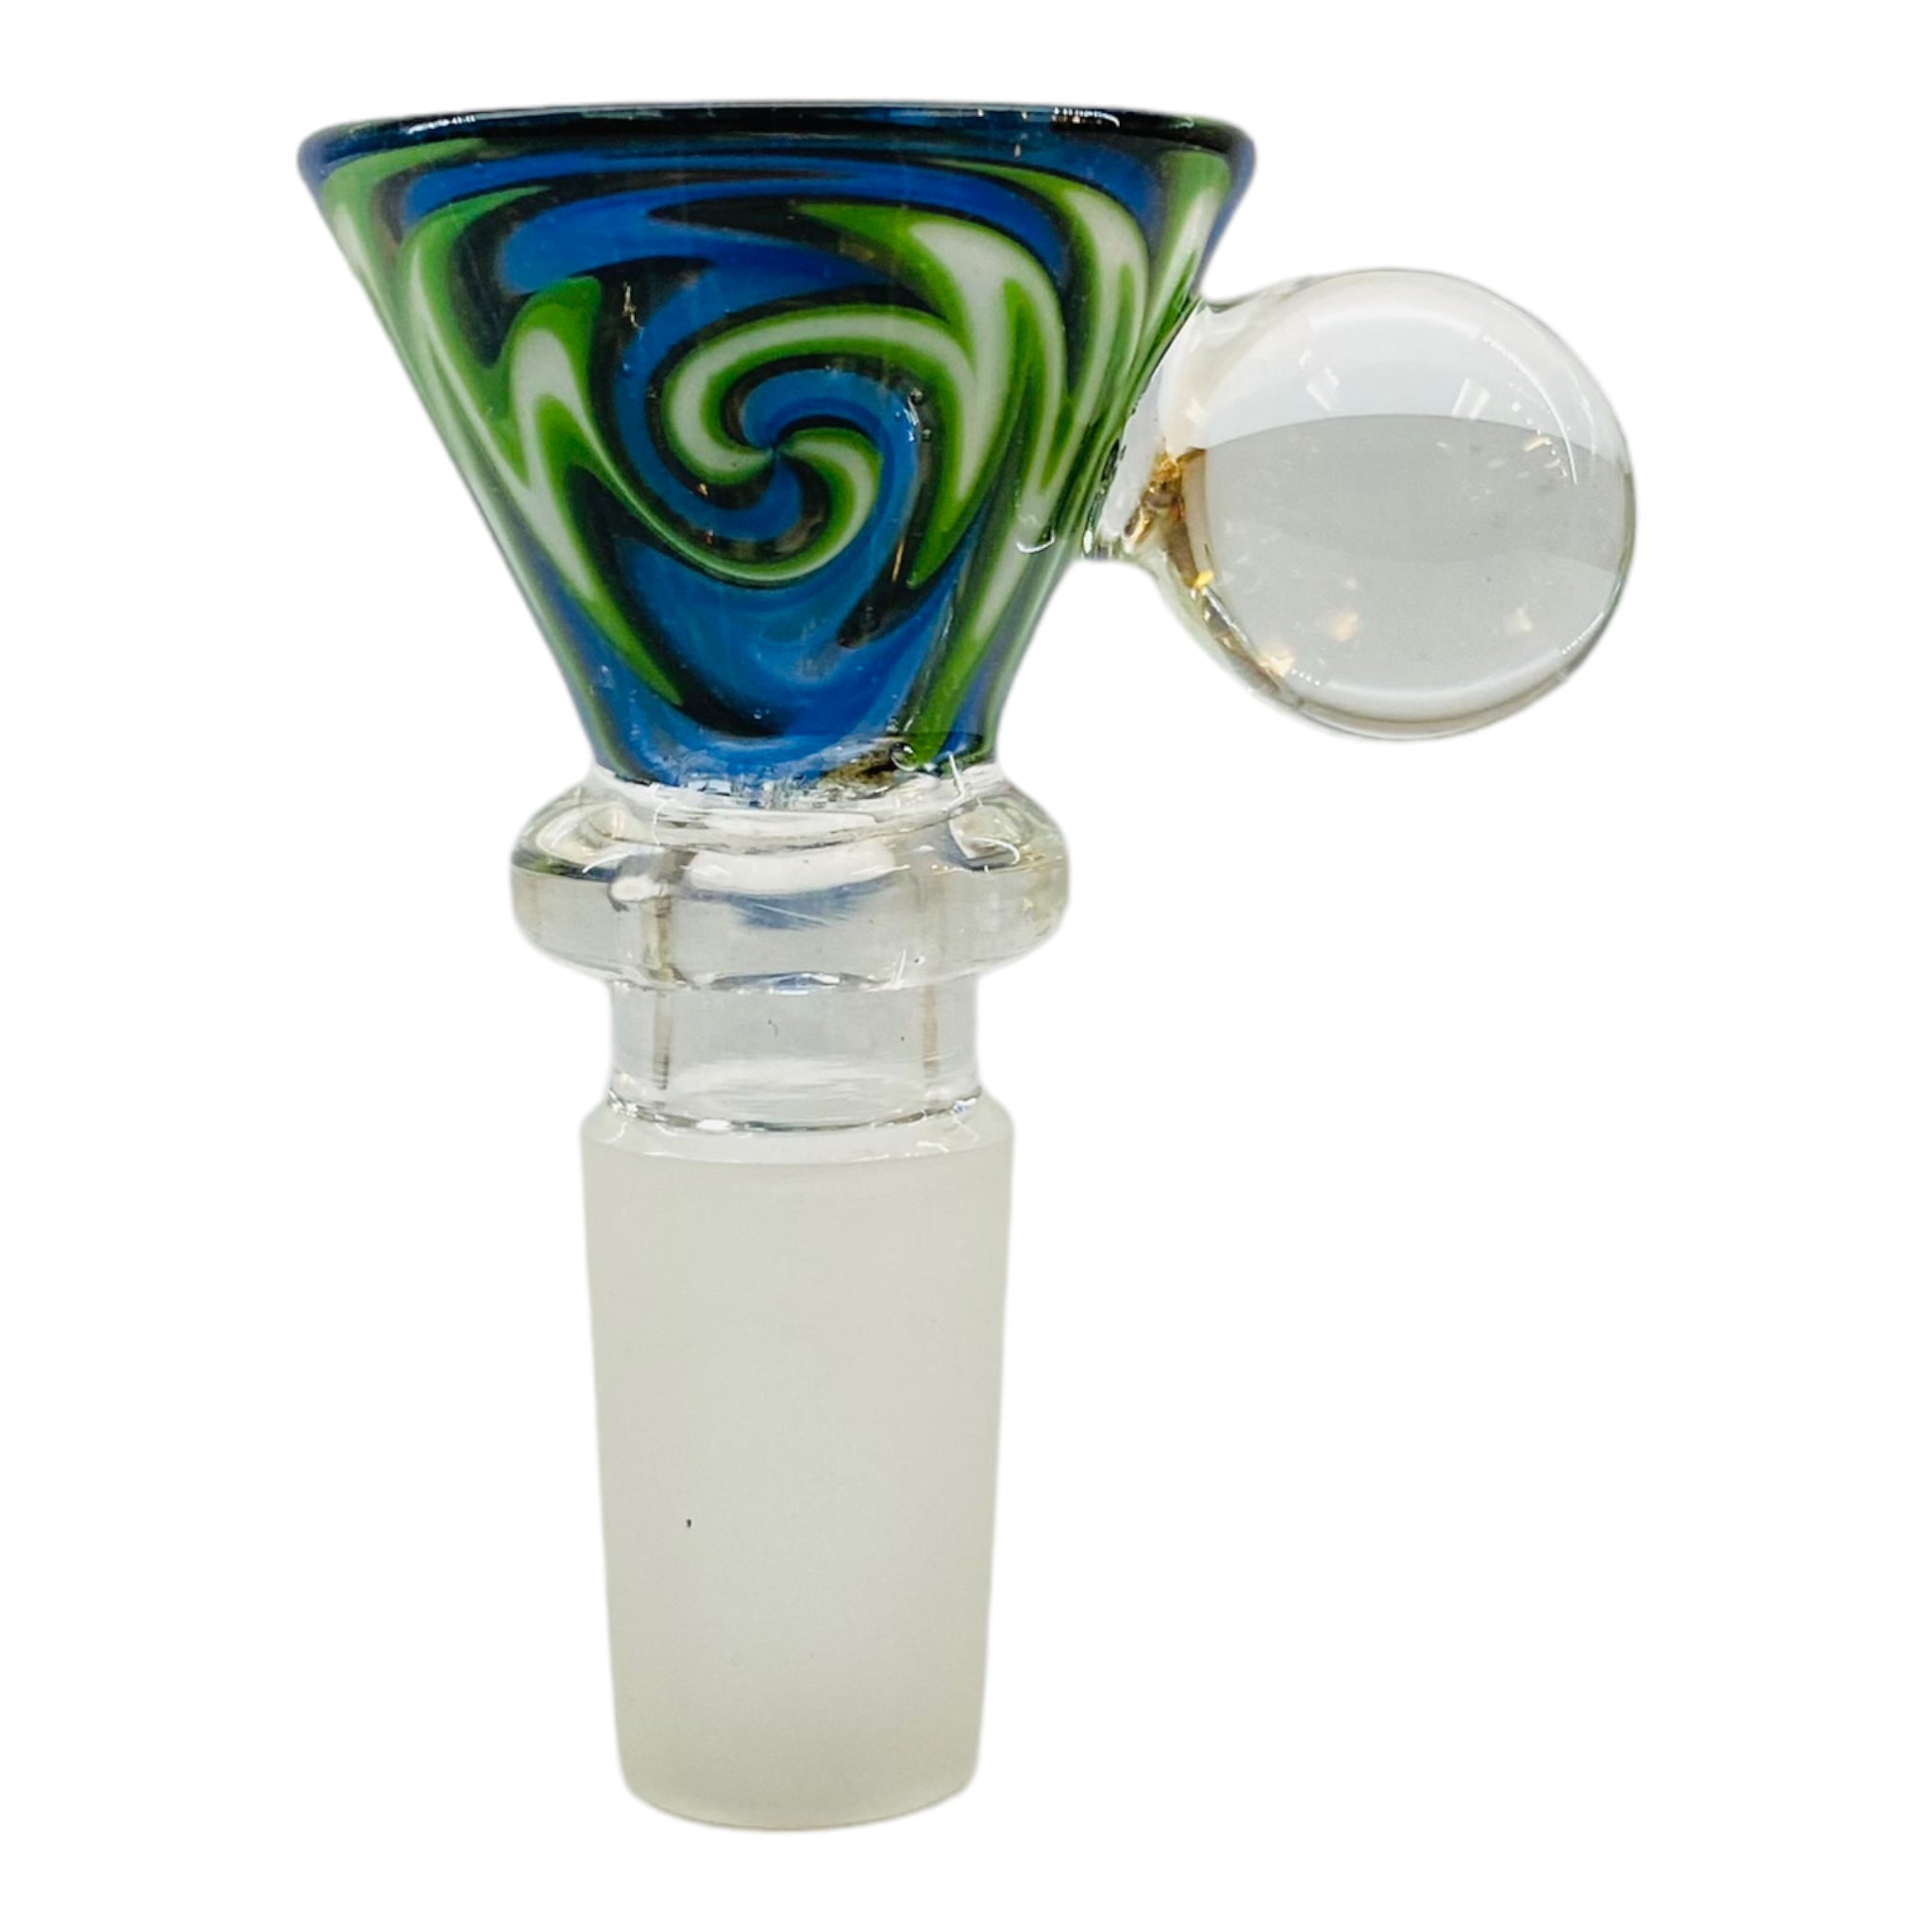 14mm Flower Bowl - Wig Wag Martini Bowl With Built In Honeycomb Screen - Green, Black, And Blue